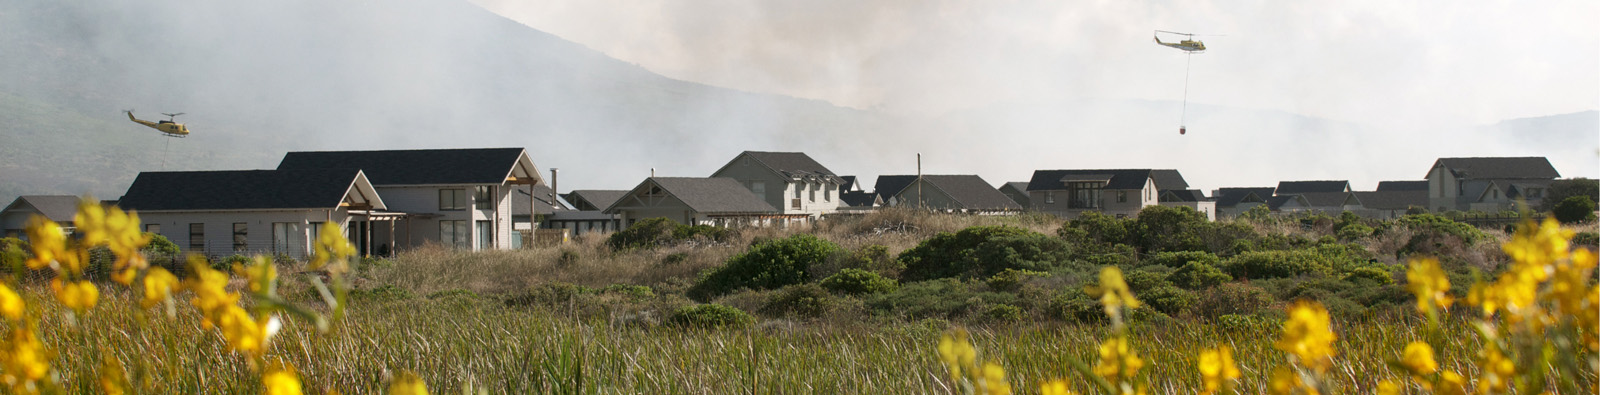 Santam partners with farmers to encourage proactive fire risk management